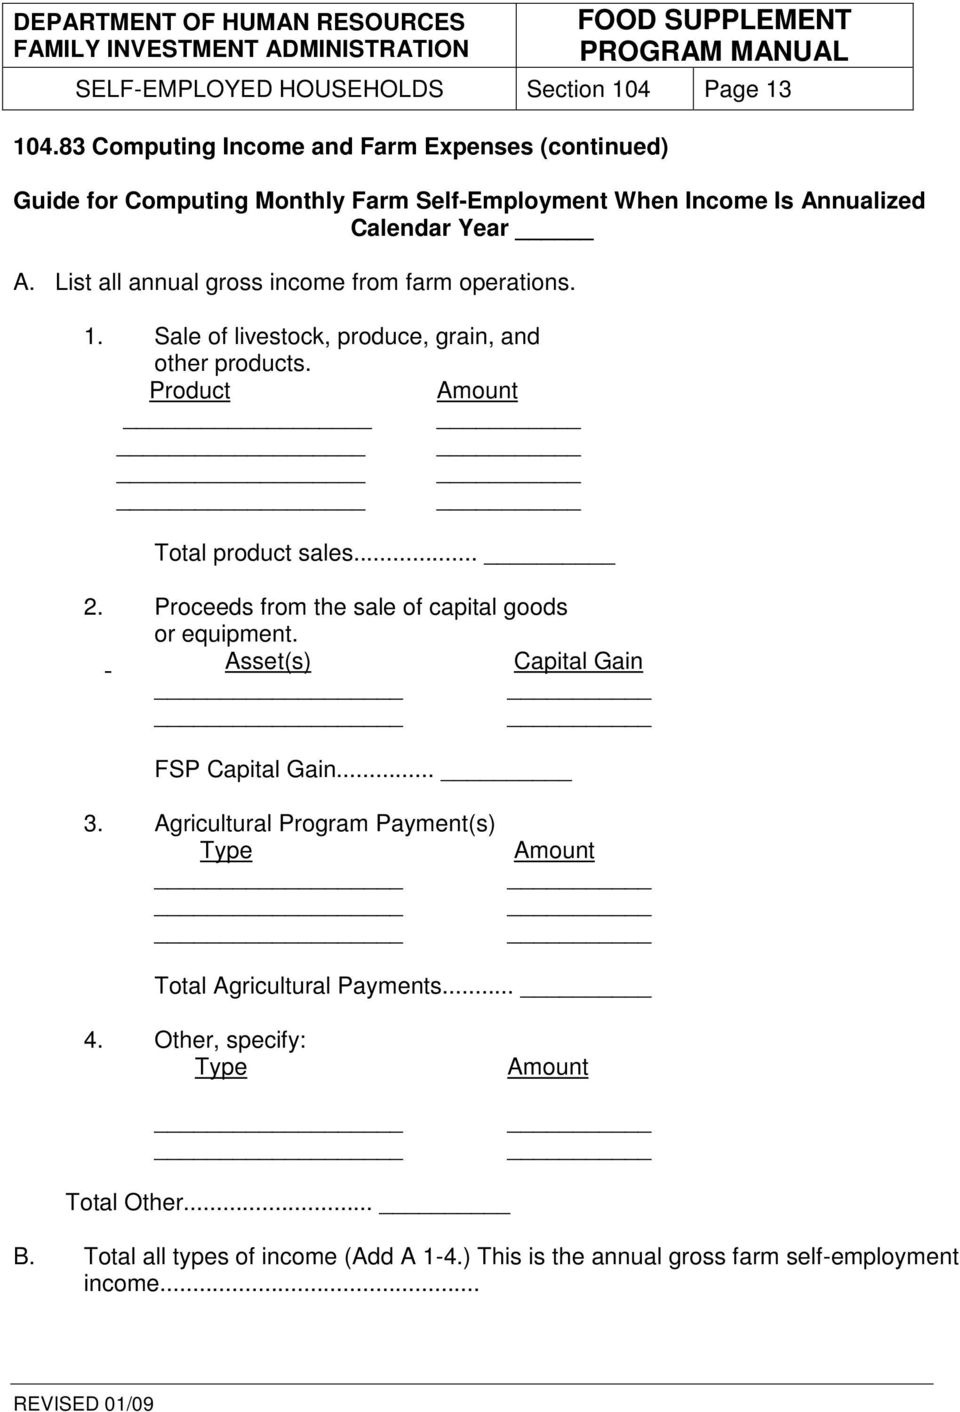 List all annual gross income from farm operations. 1. Sale of livestock, produce, grain, and other products. Product Amount Total product sales... 2.